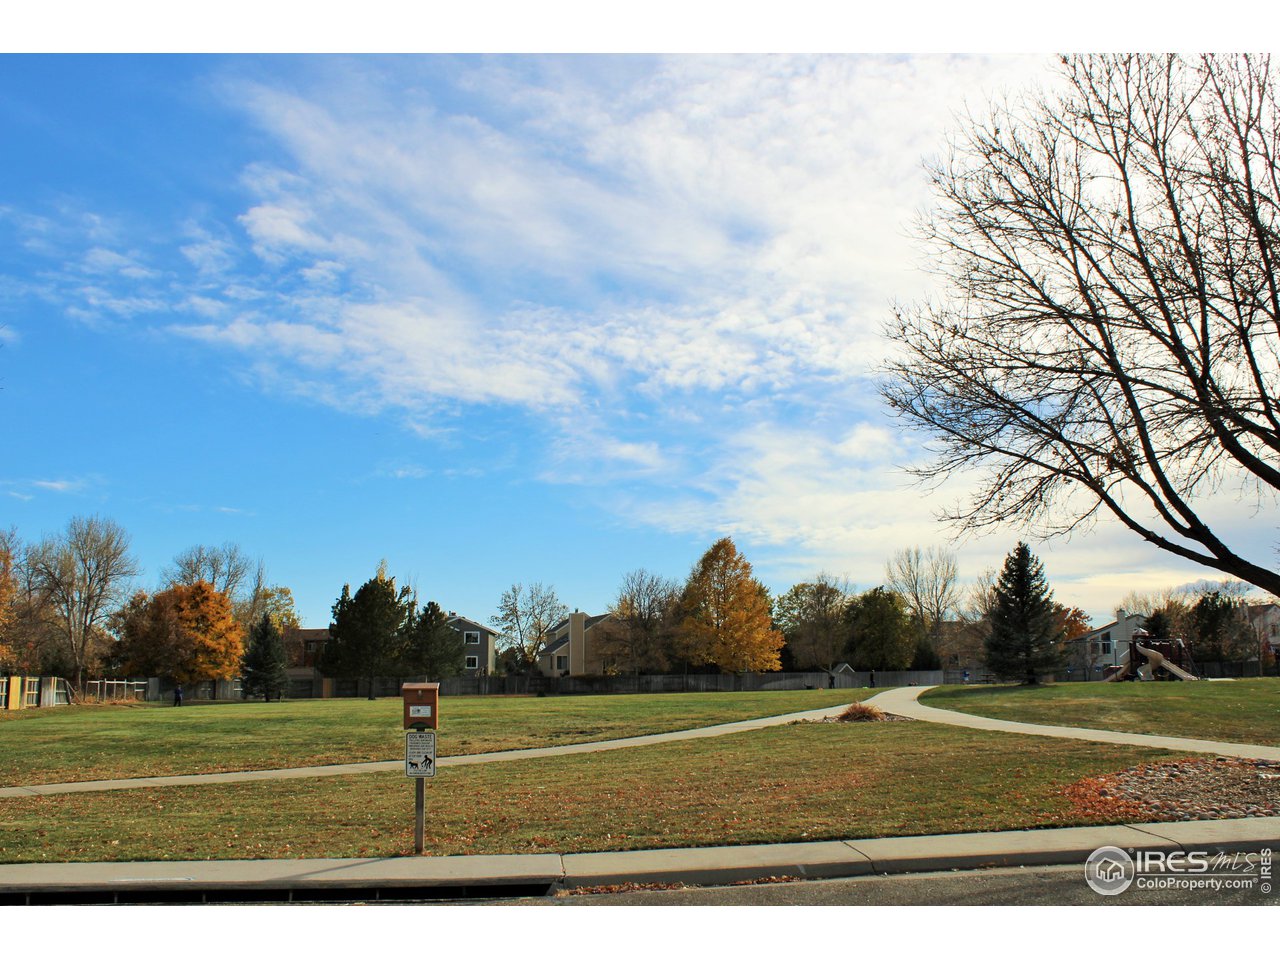 Cherrywood Park is right across the street, easy access to paths and playground.